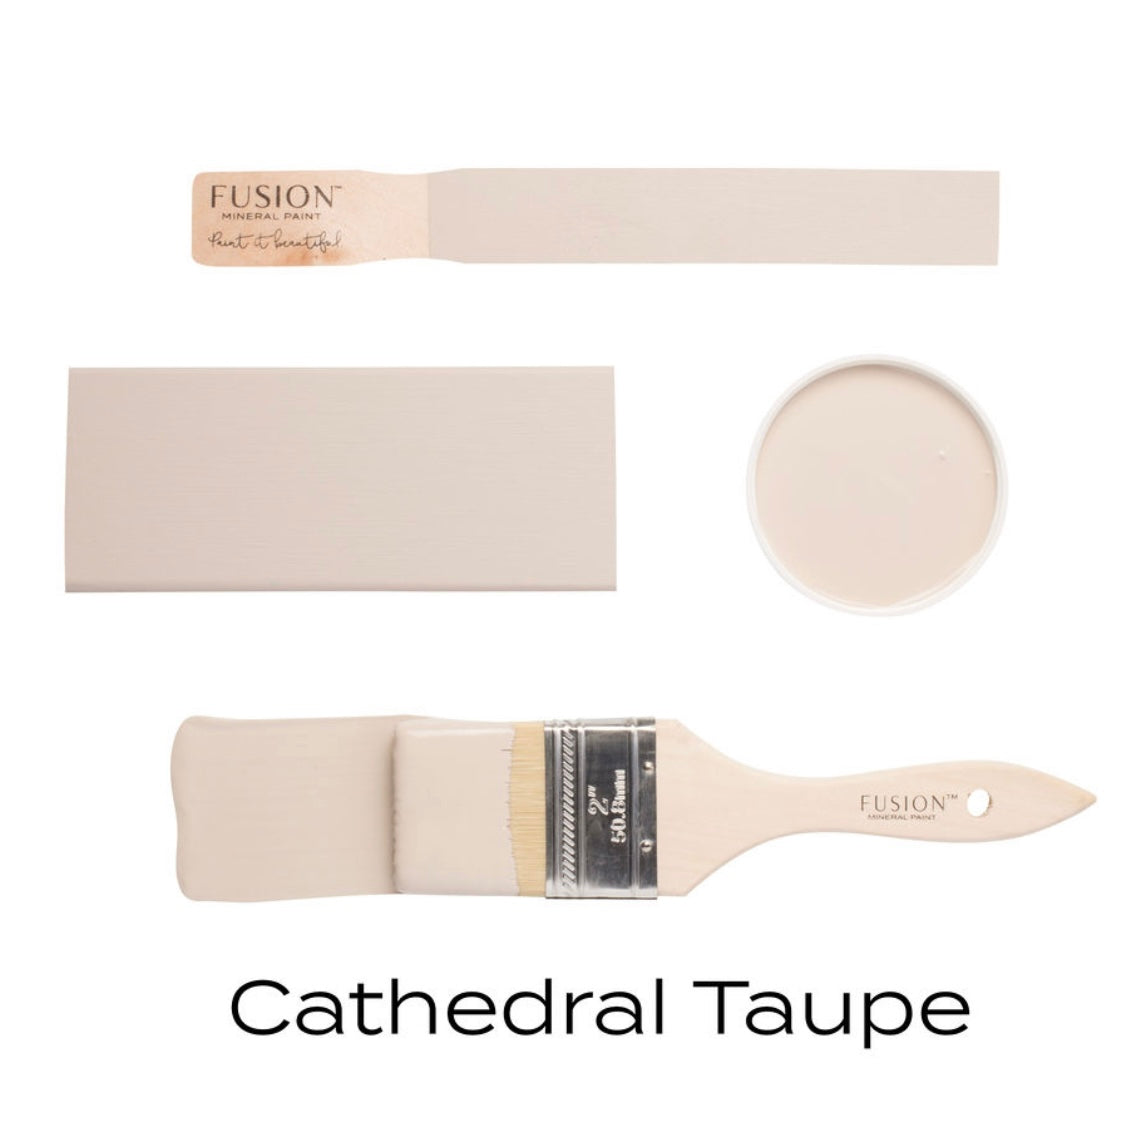 Cathedral Taupe